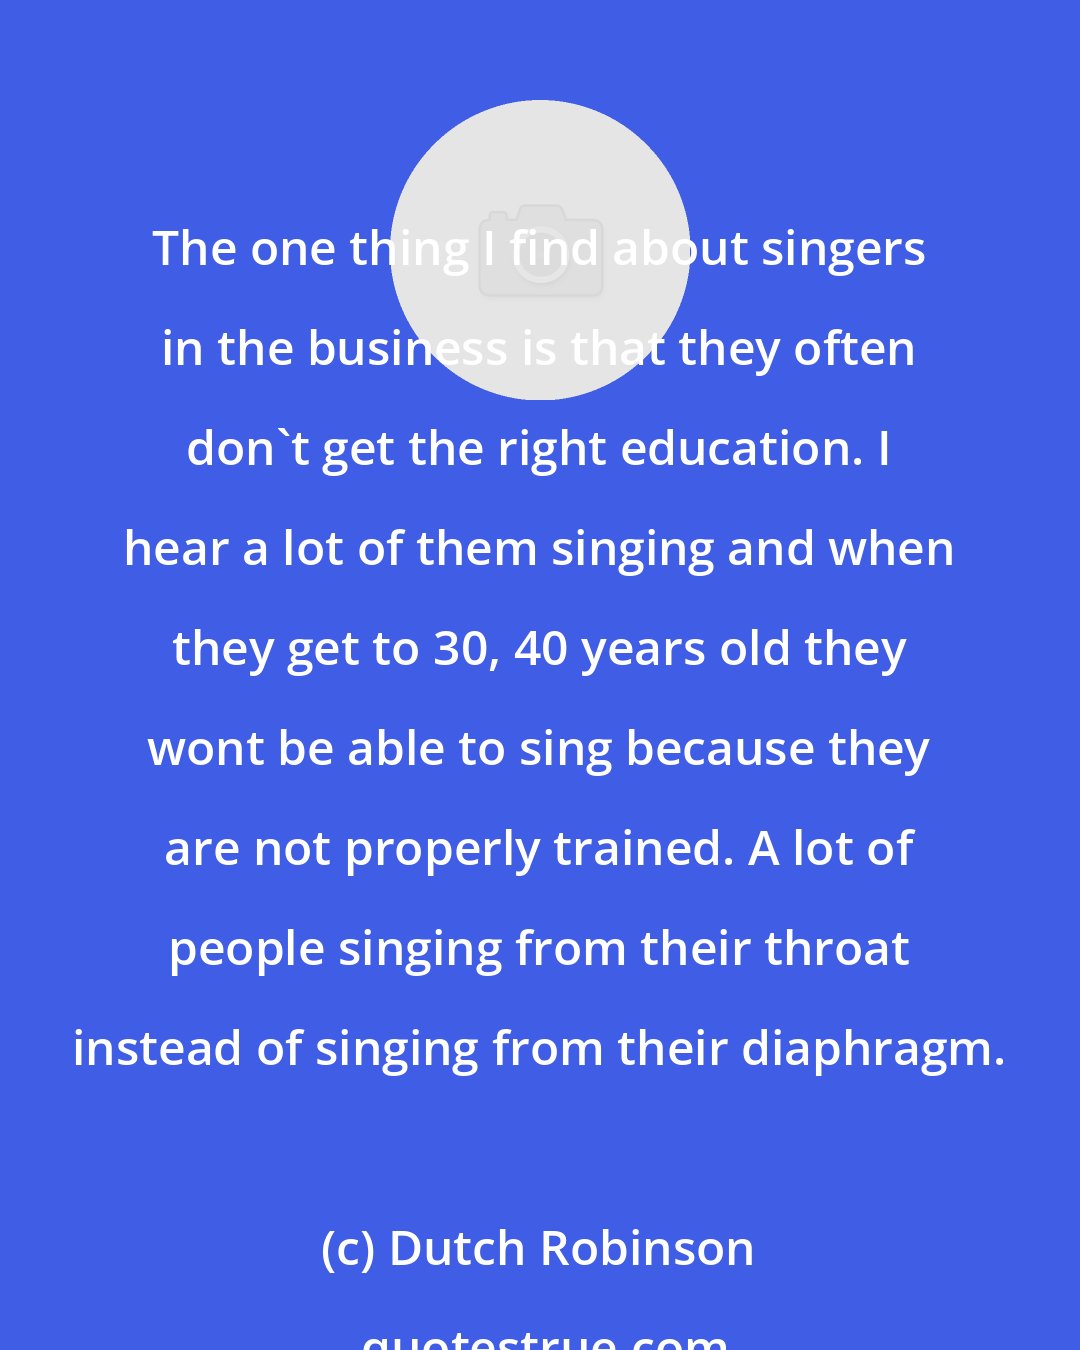 Dutch Robinson: The one thing I find about singers in the business is that they often don't get the right education. I hear a lot of them singing and when they get to 30, 40 years old they wont be able to sing because they are not properly trained. A lot of people singing from their throat instead of singing from their diaphragm.